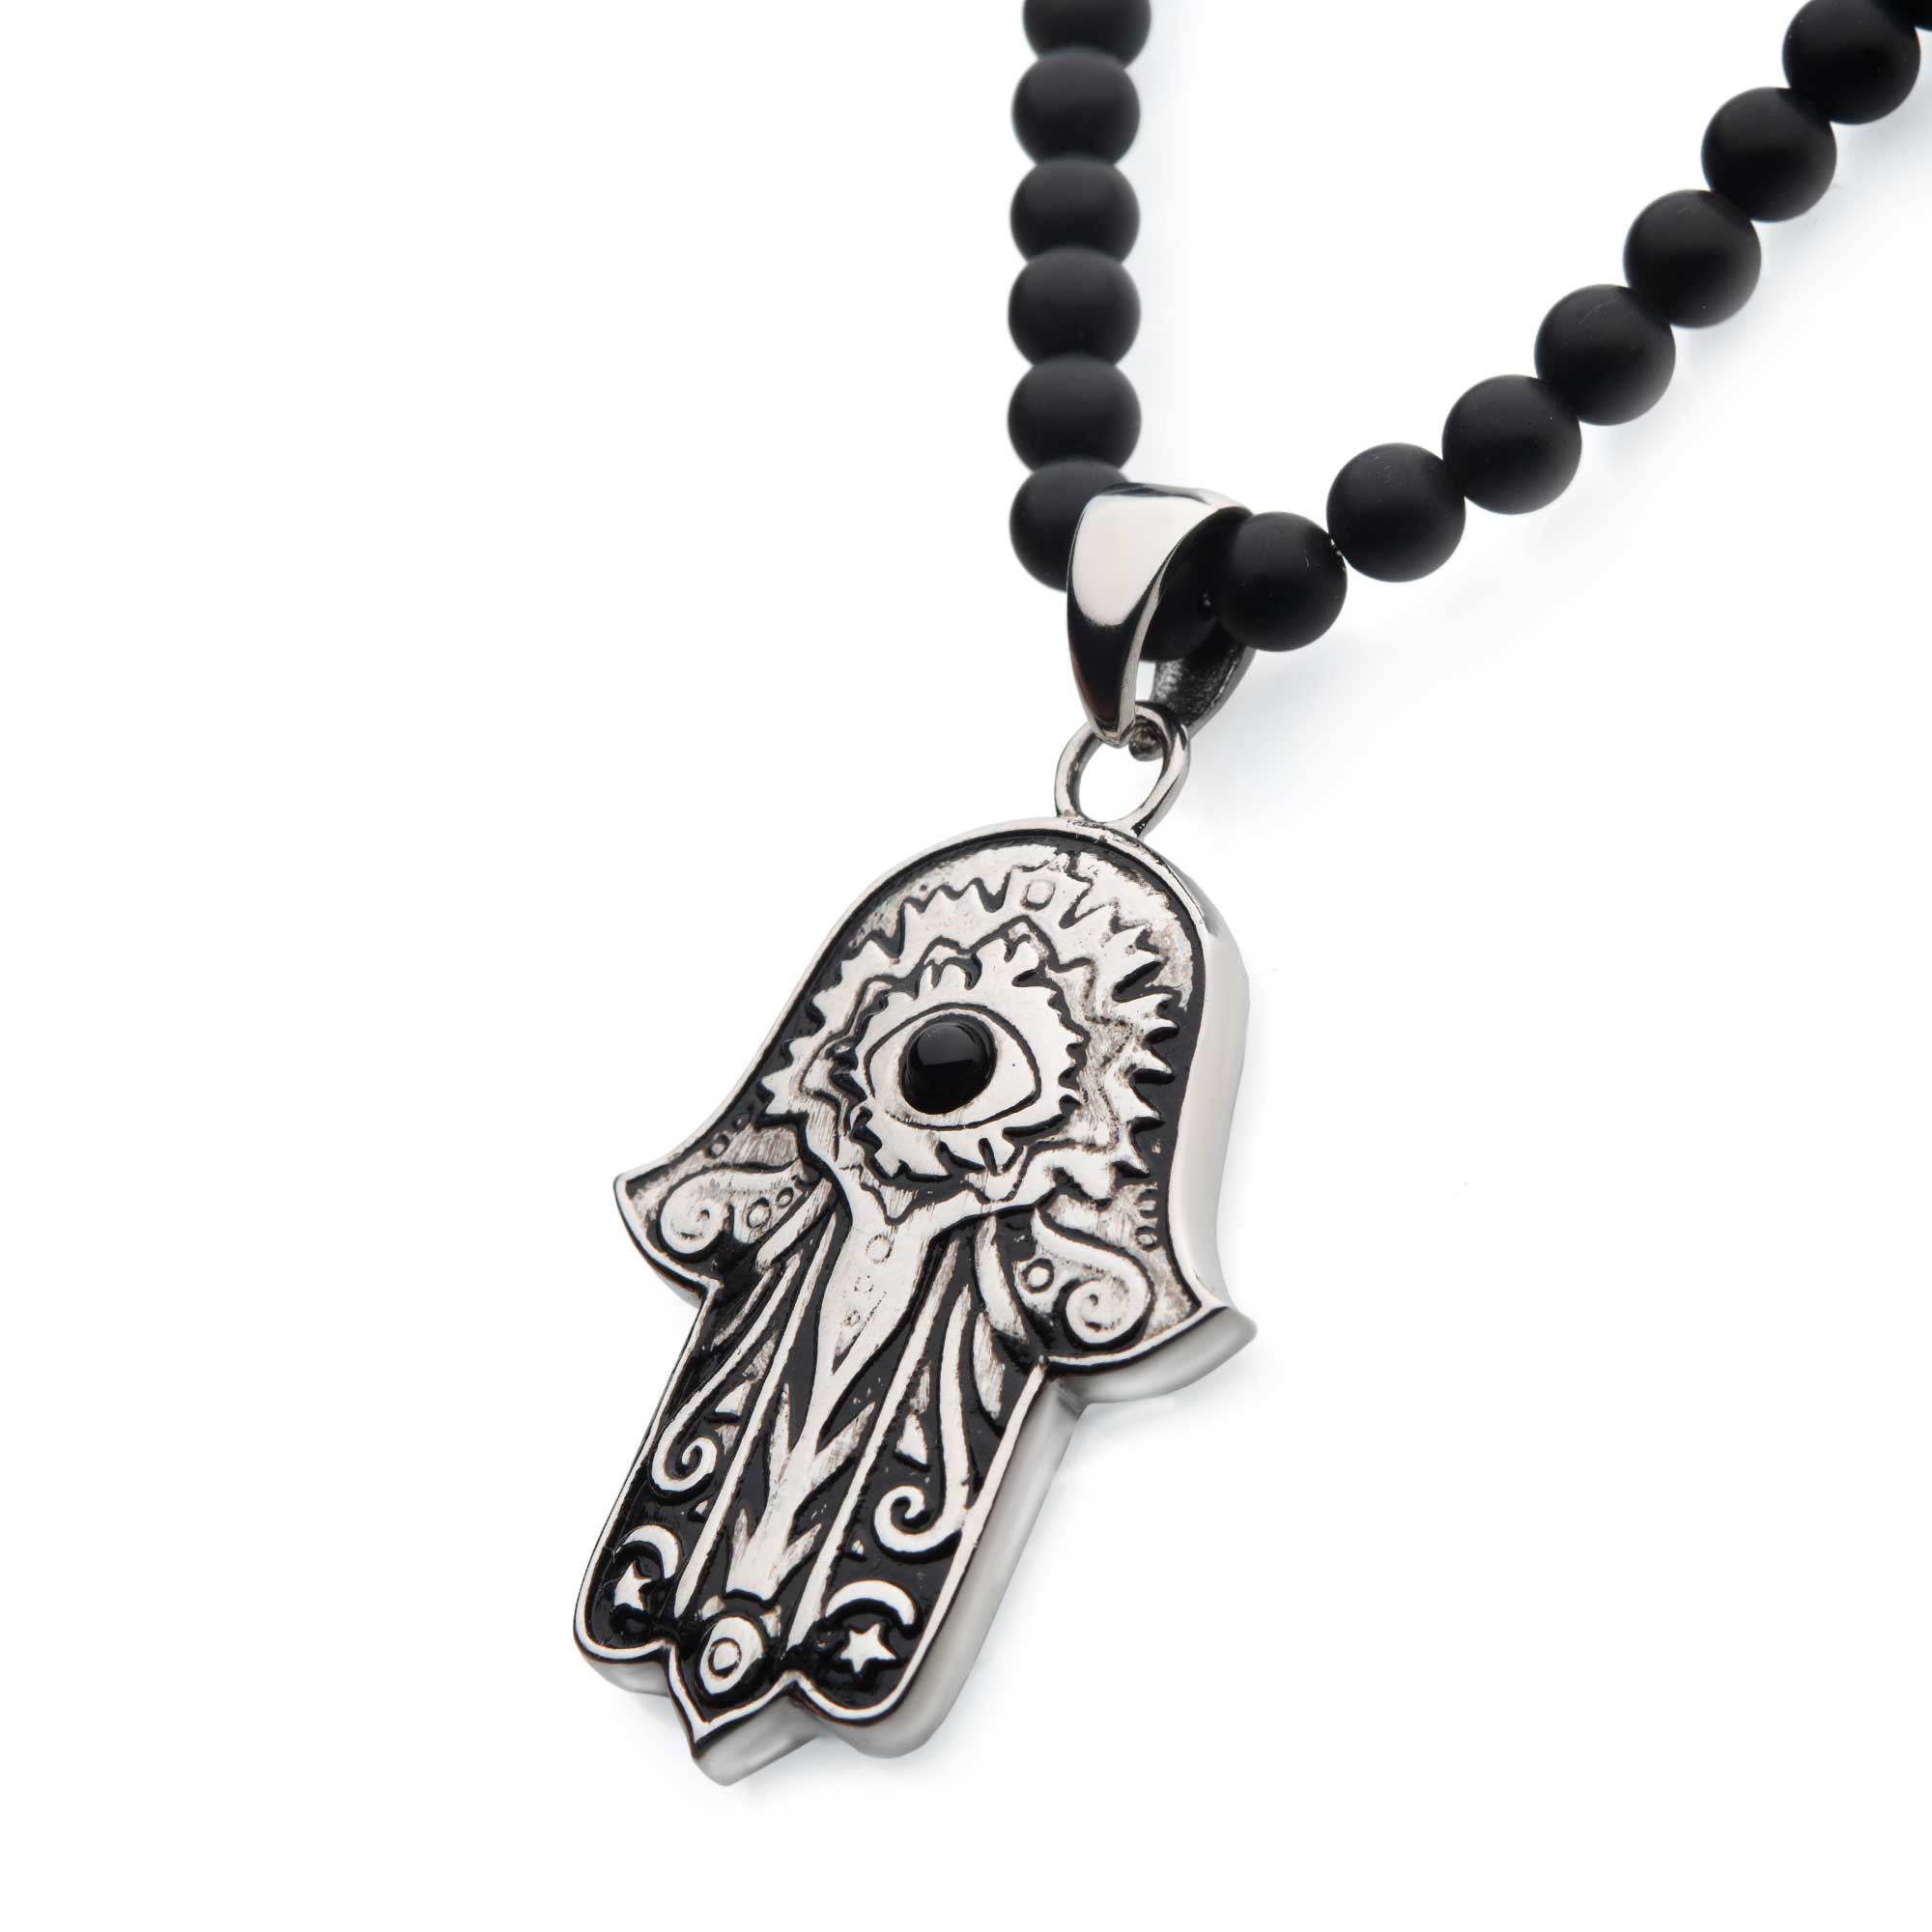 Stainless Steel with Centerpiece Black Agate Stone Hamsa Pendant, with Black Agate Stone Bead Necklace Image 2 Midtown Diamonds Reno, NV